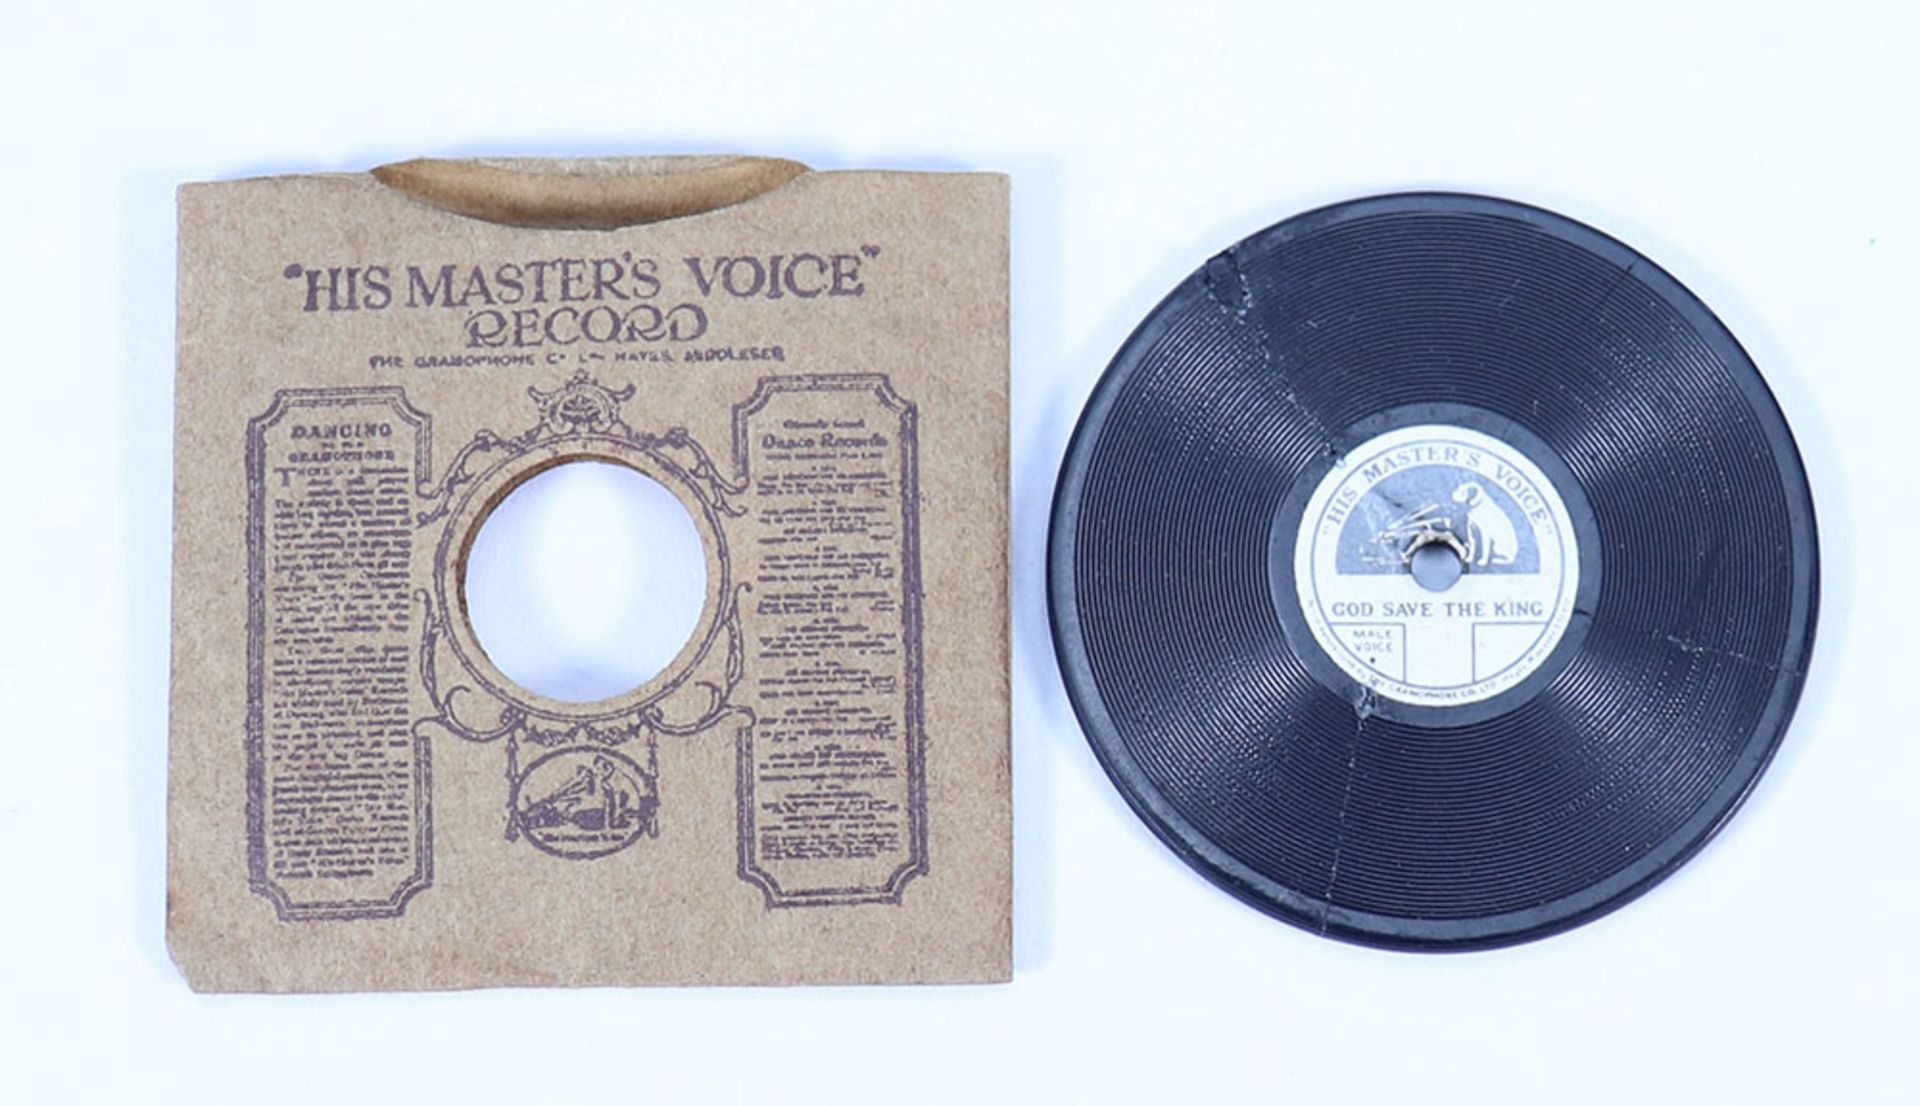 A rare miniature record ‘God Save the King’ HMV record as made for Queen Mary’s Dolls House, circa 1